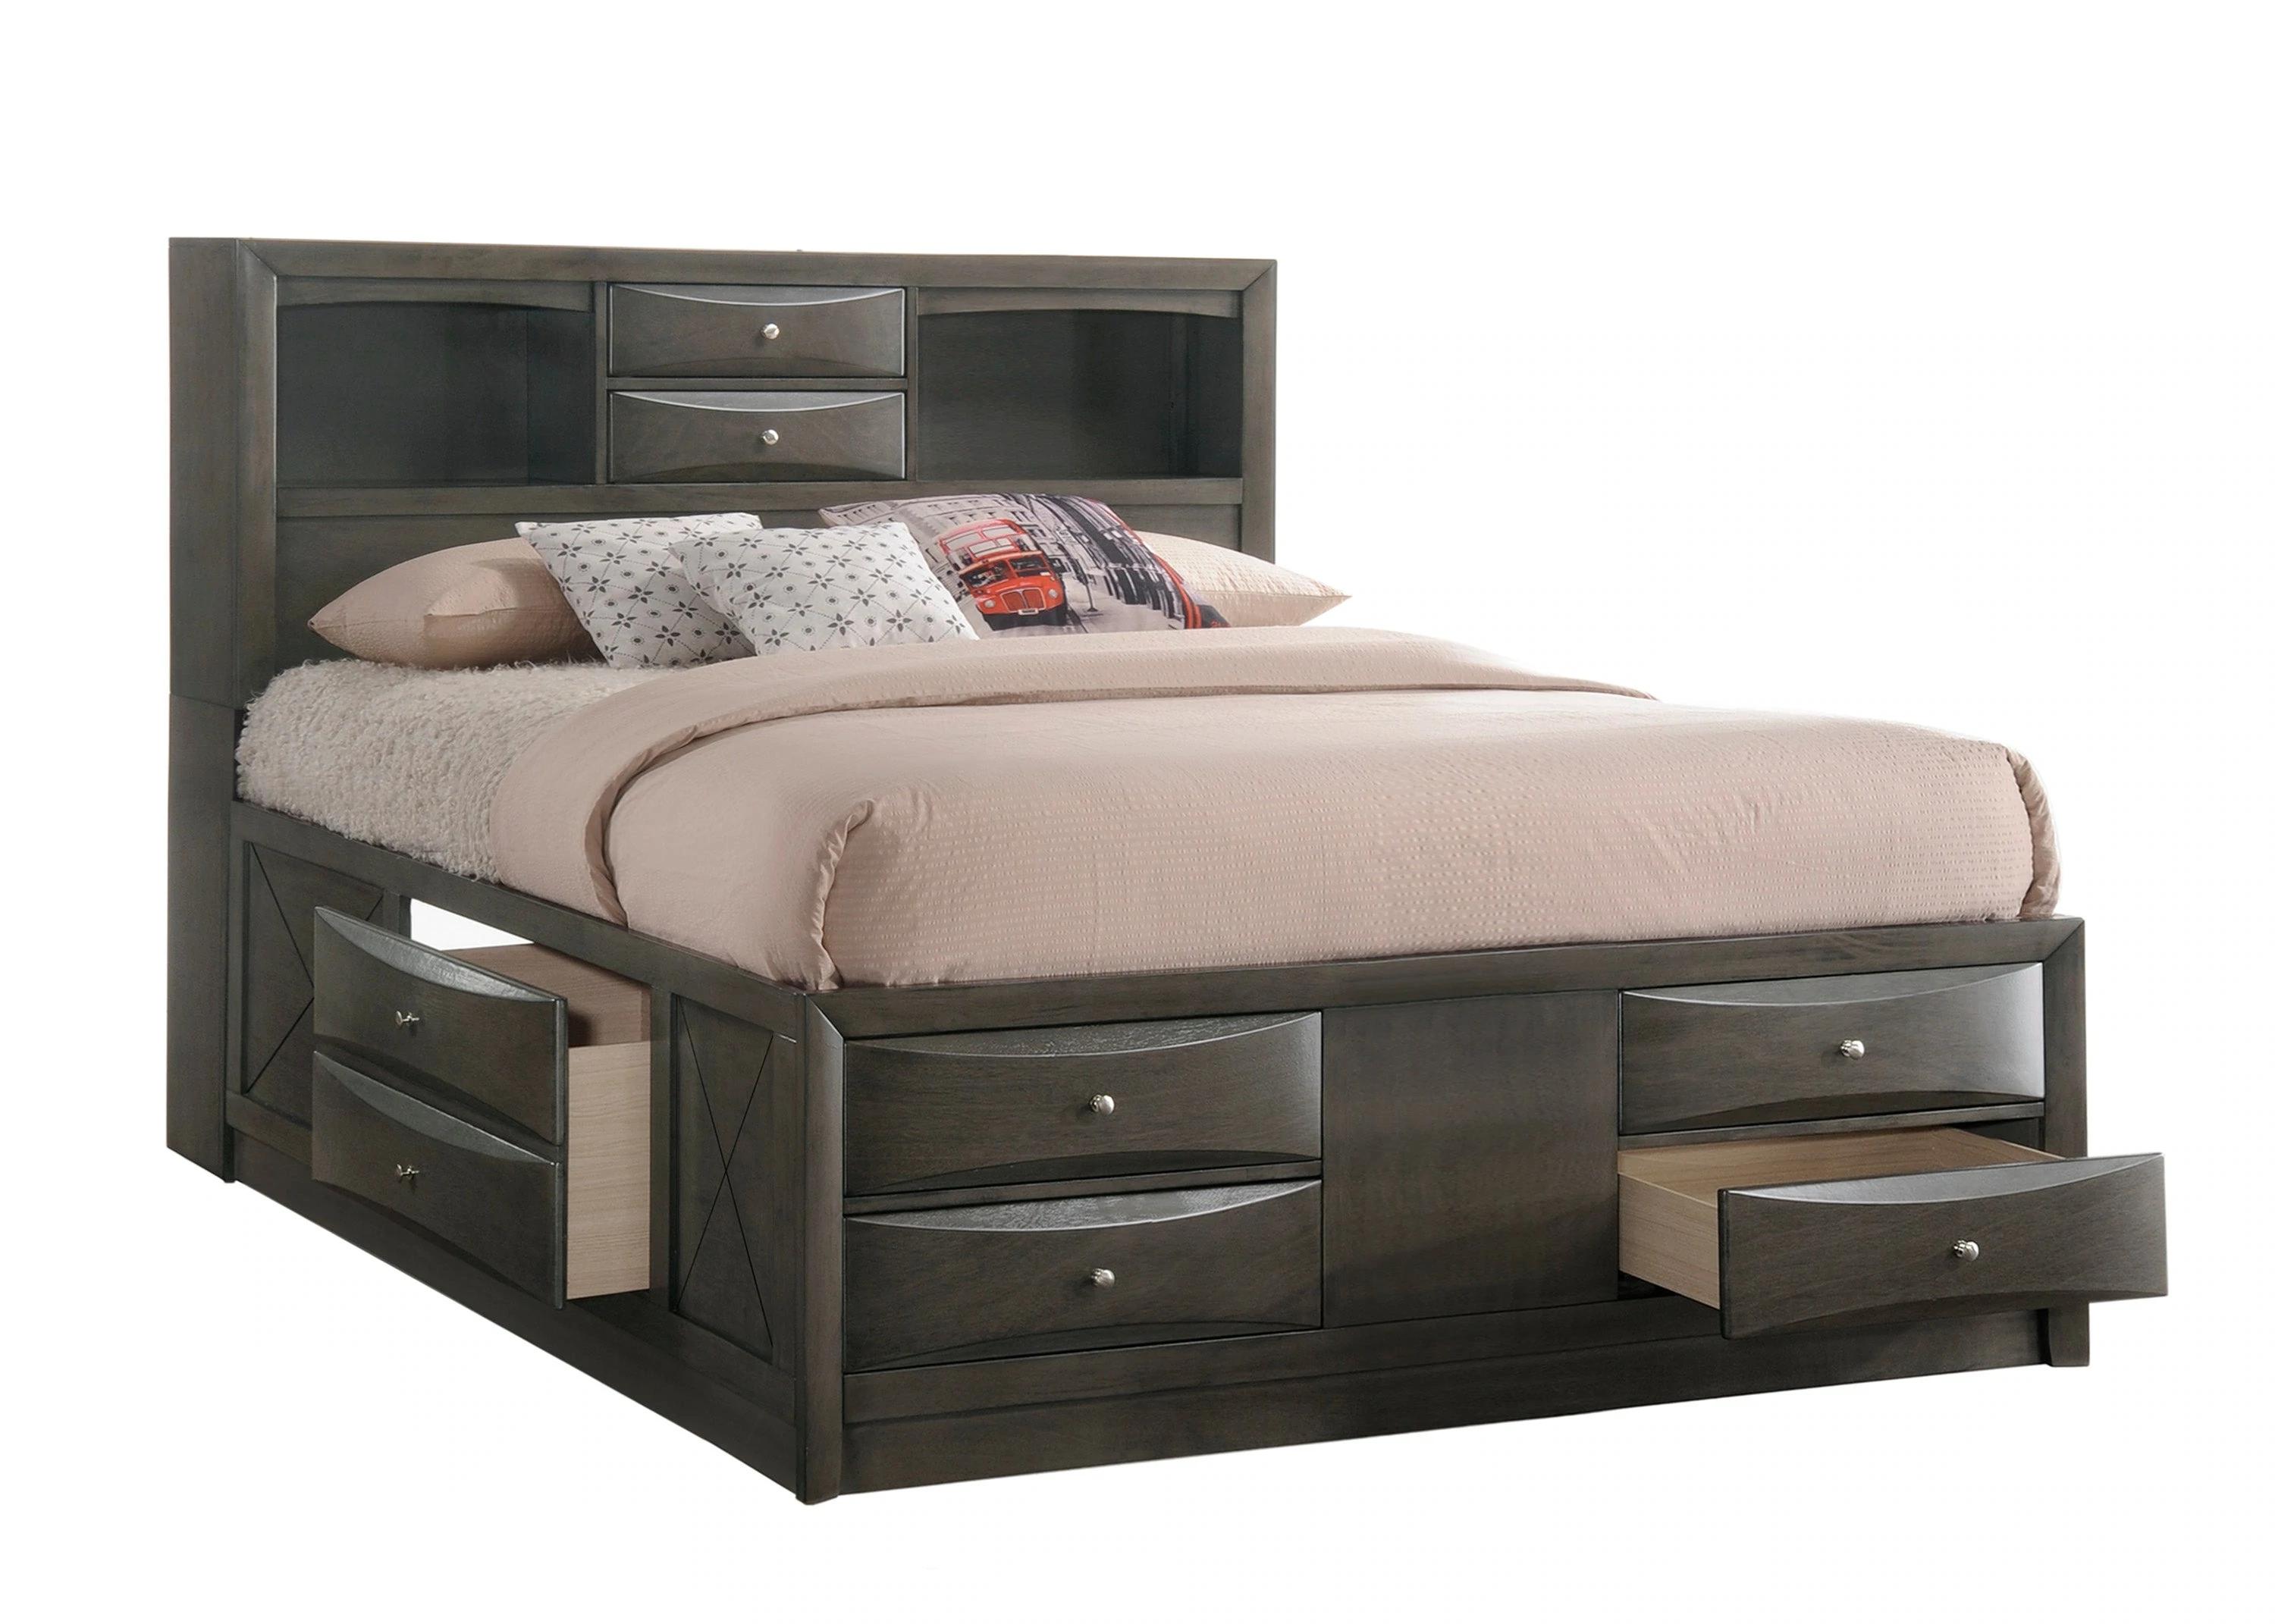 Contemporary, Transitional Storage Bed Emily B4275-K-Bed in Gray 